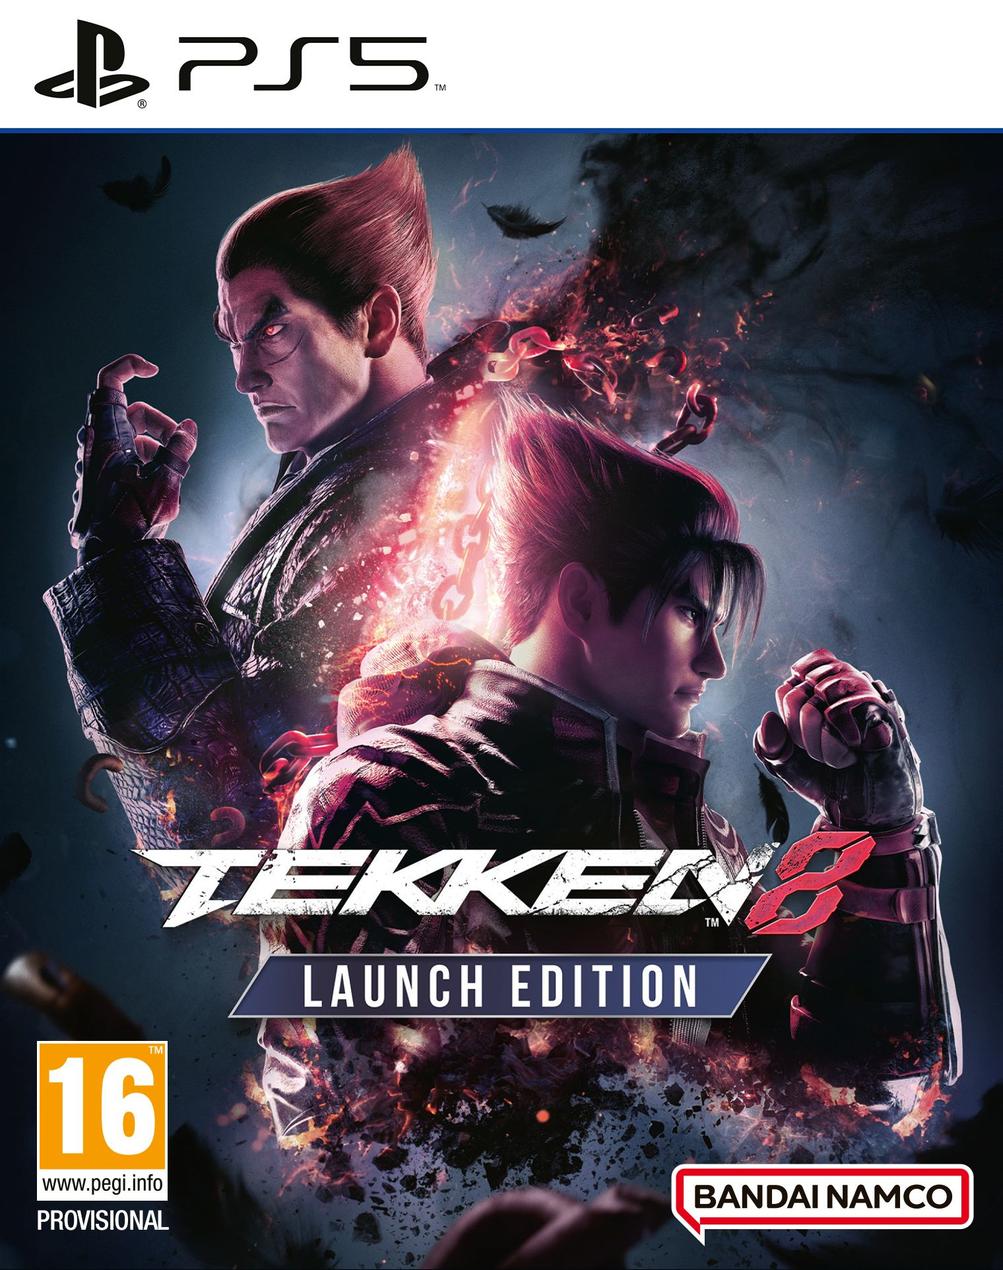 Offerta per Bandai Namco Entertainment - Tekken 8 Launch Edition Inglese Playstation 5 a 49,99€ in Comet